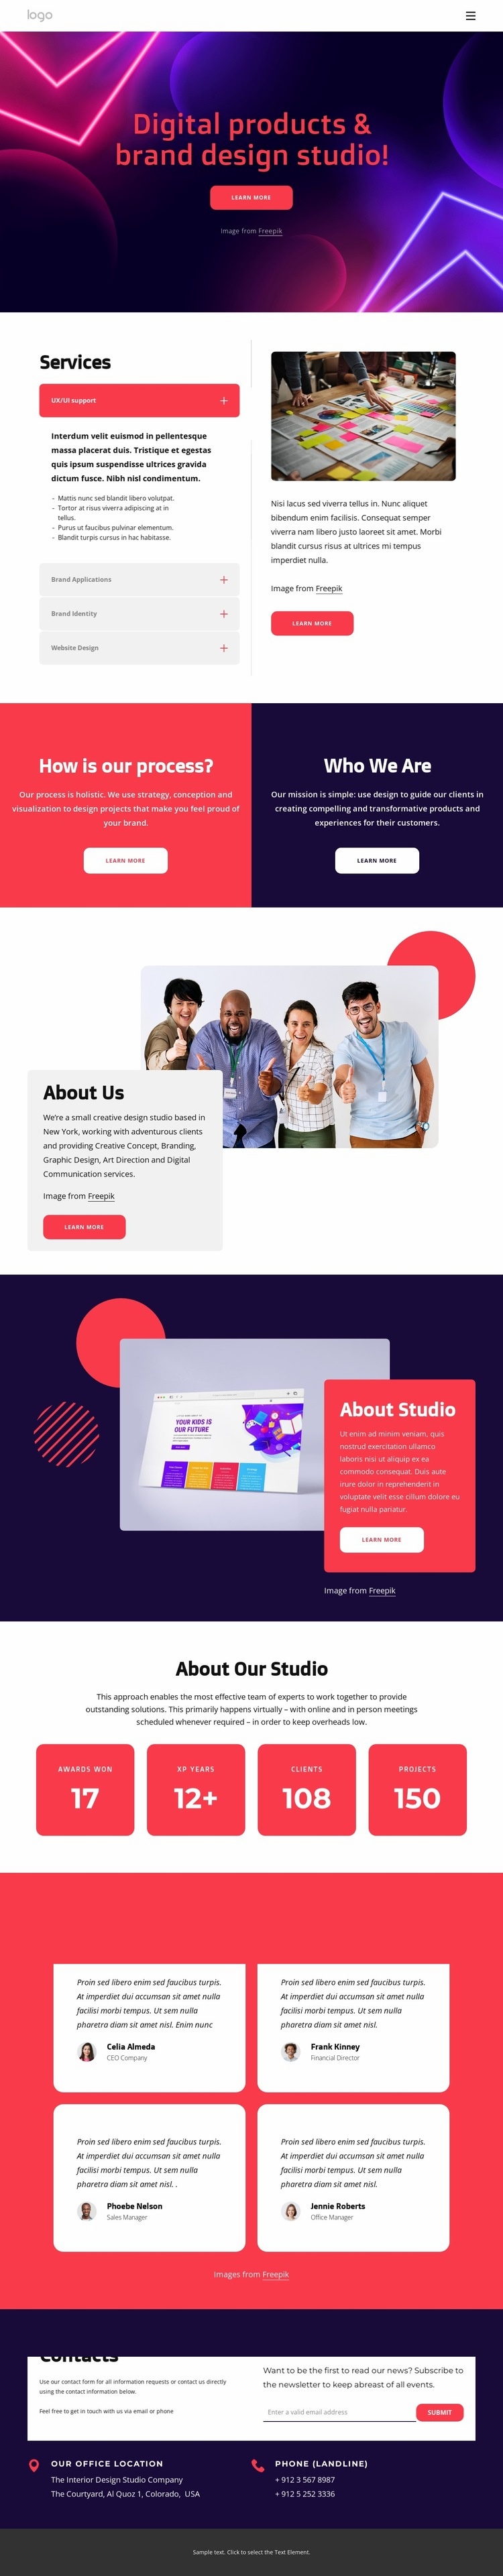 Digital products and brand design studio Web Page Design